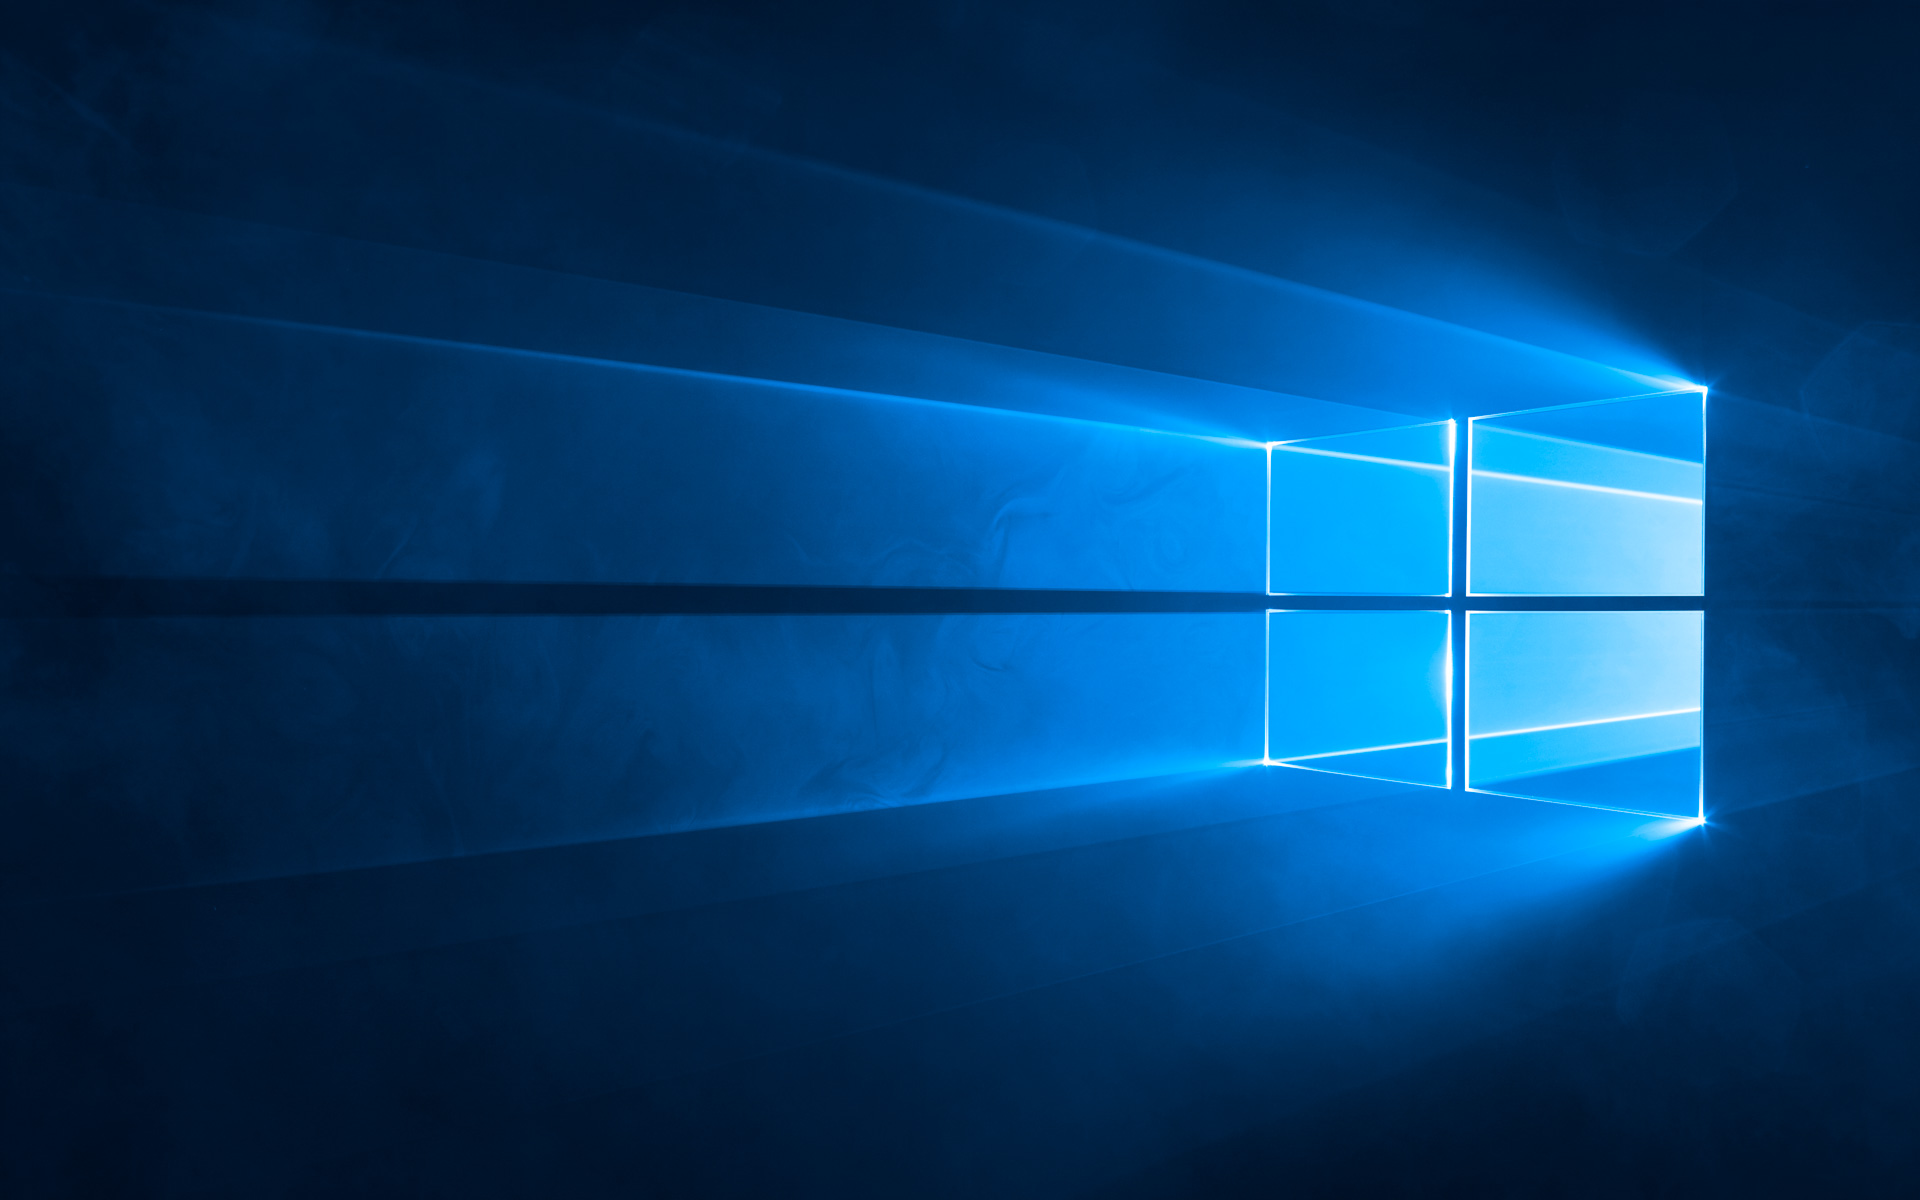 Windows 10's default wallpaper, depicting a Windows logo shining through with what appears to be lasers coming out of the logo.